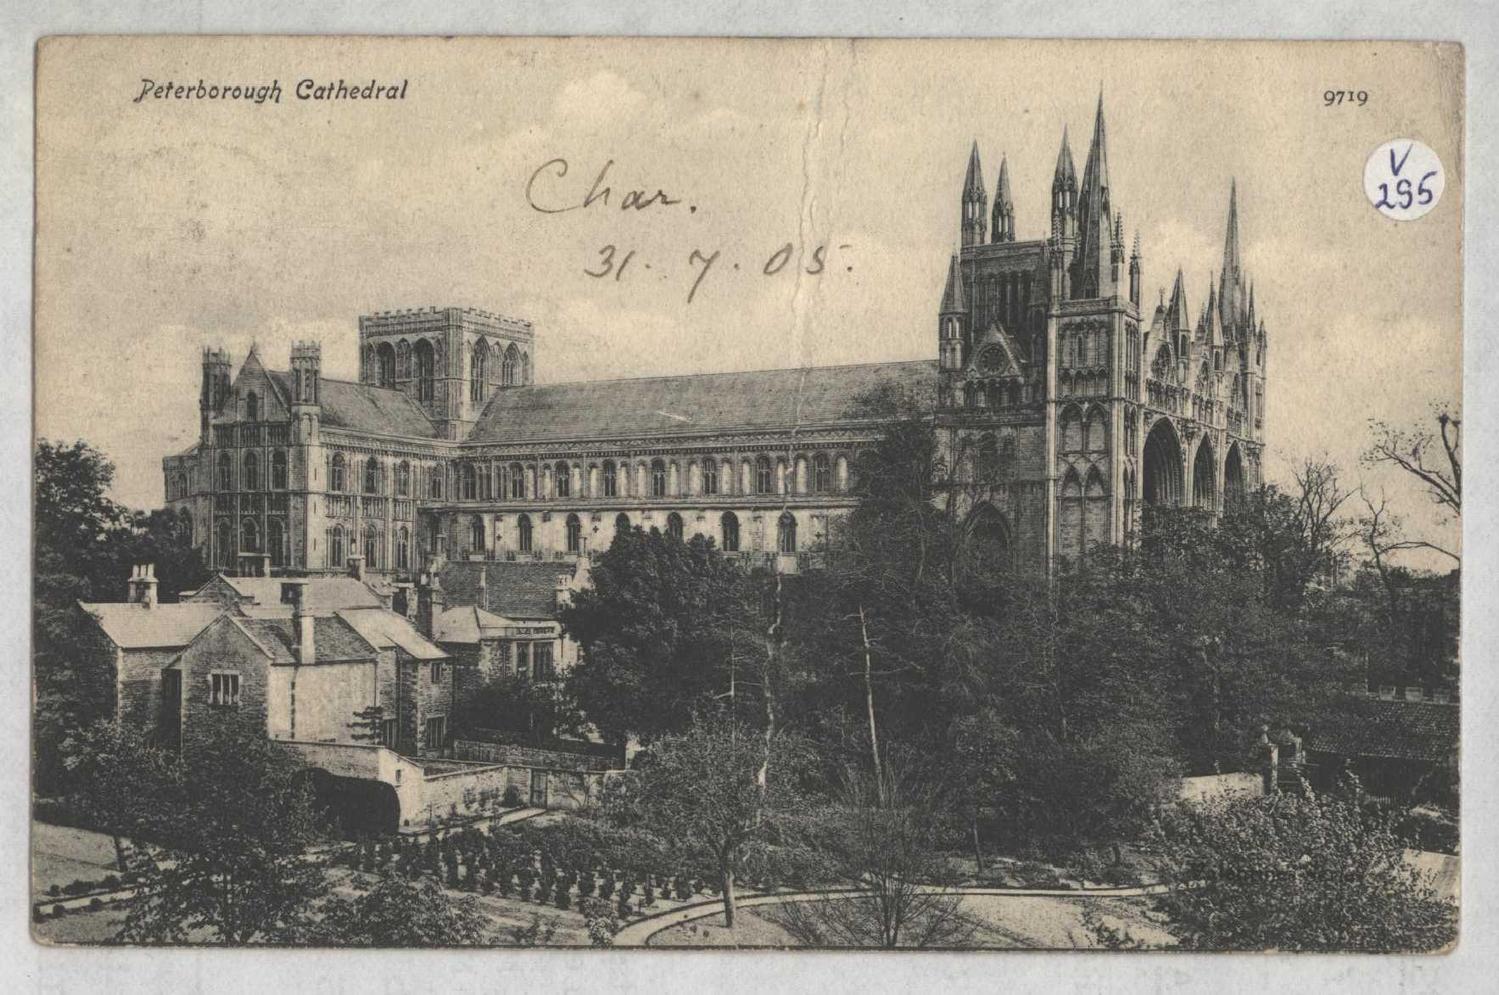 Peterborough Cathedral from the north west. Postcard circa 1900.